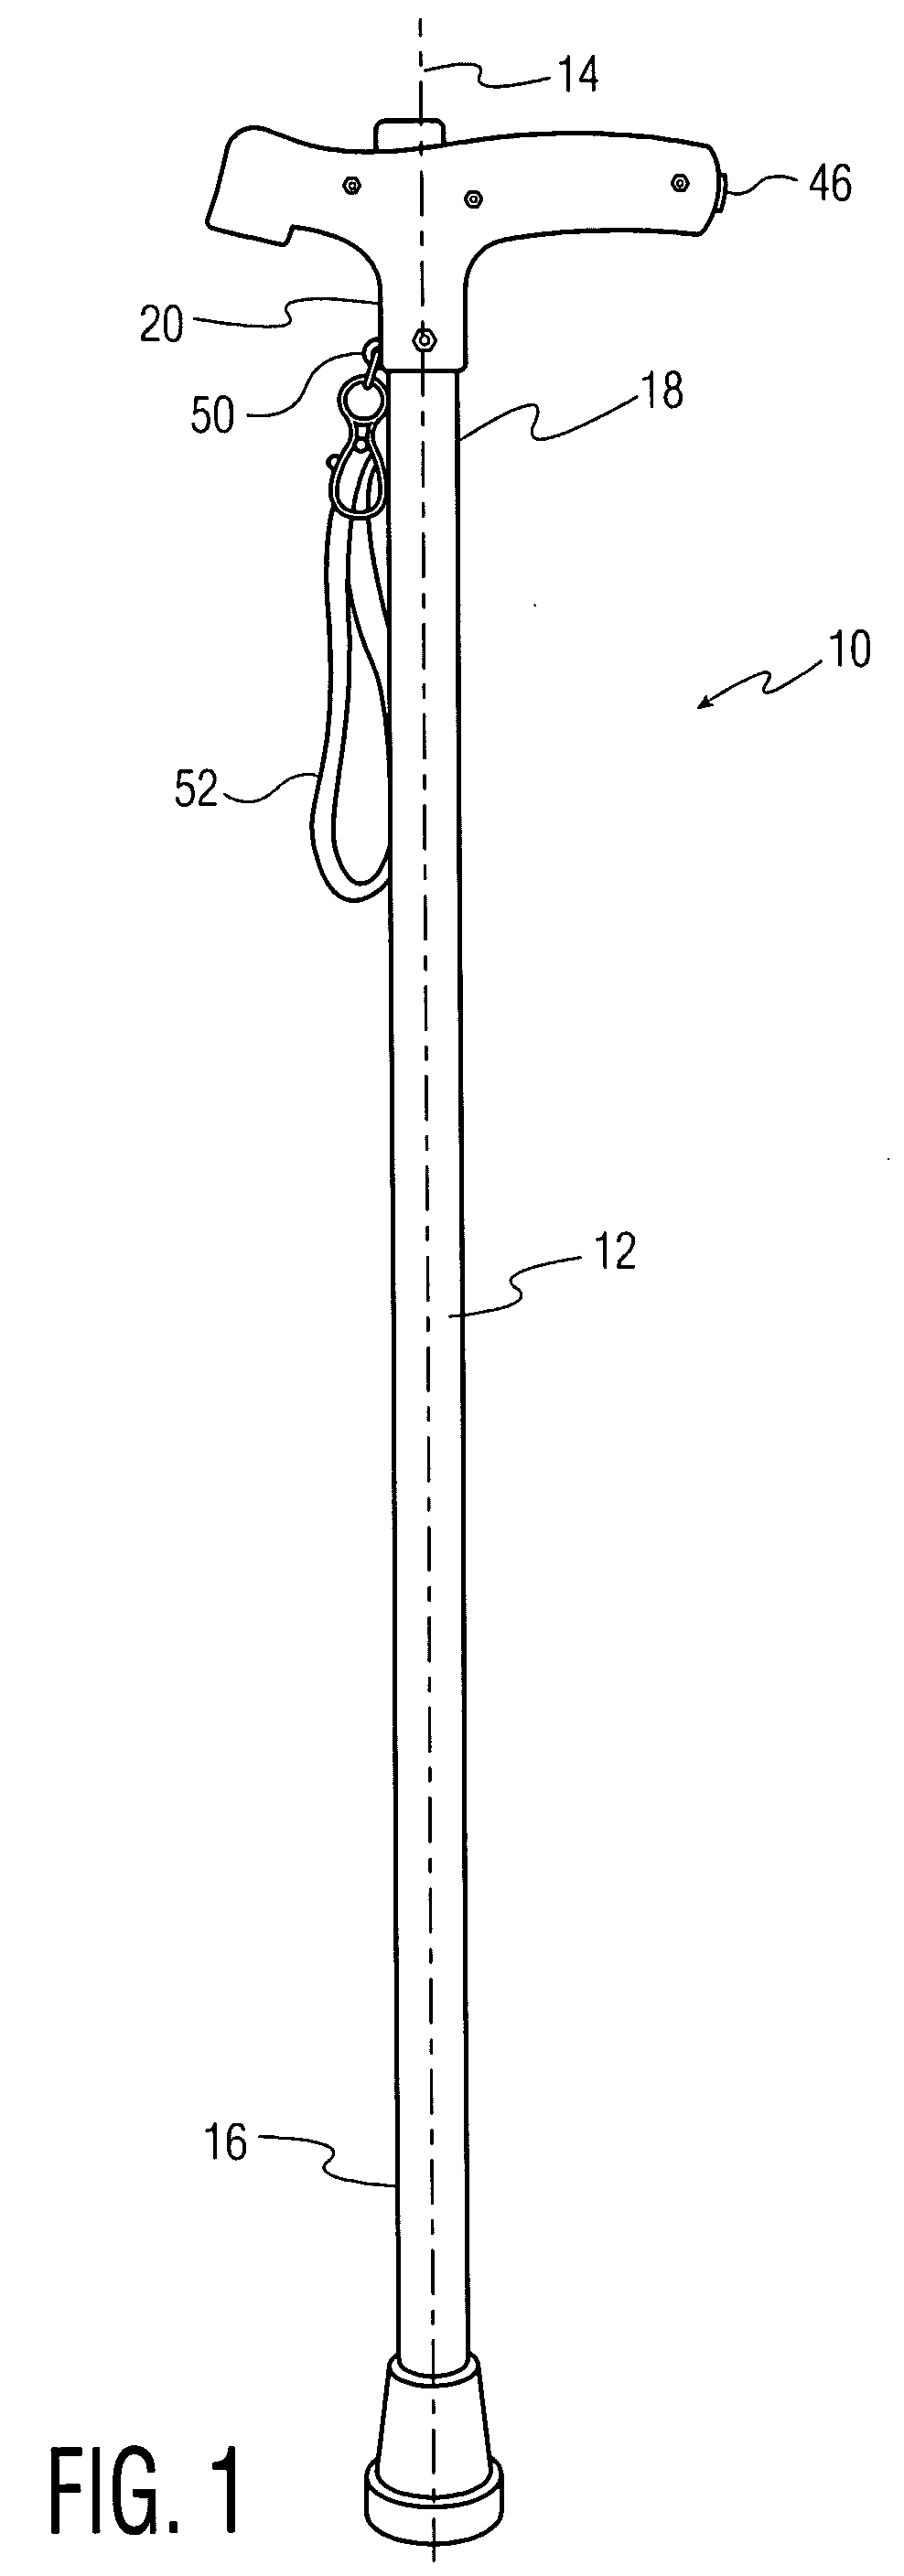 Walking cane with mechanical and magnetic pick-up devices and illumination source